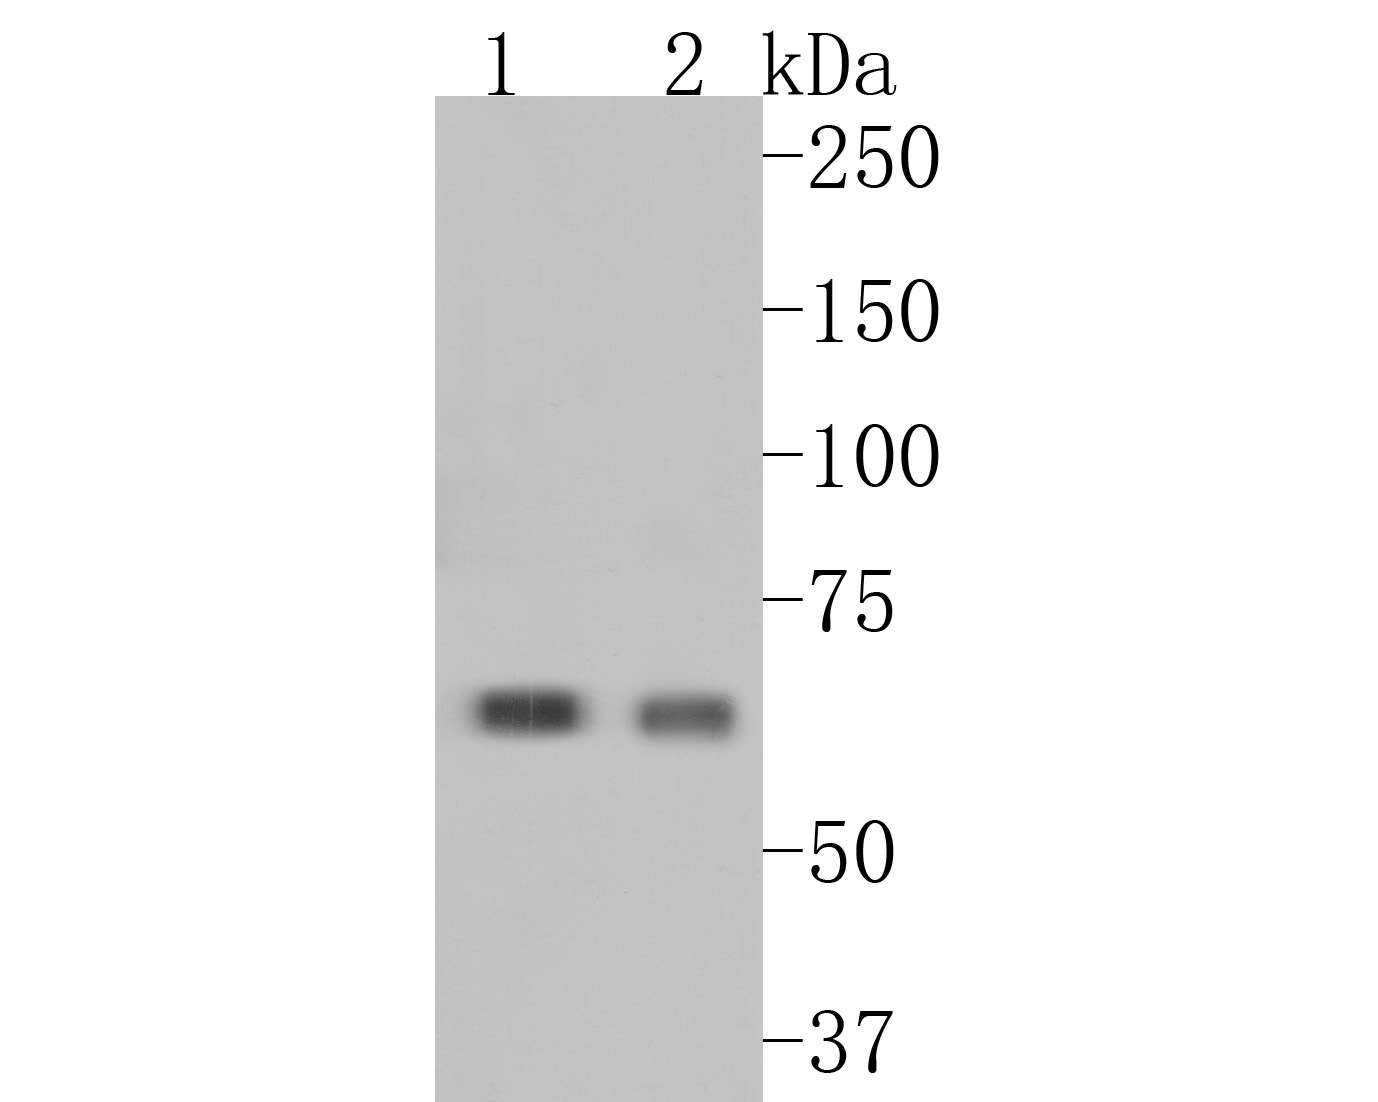 Western blot analysis of CRMP3 on different lysates. Proteins were transferred to a PVDF membrane and blocked with 5% BSA in PBS for 1 hour at room temperature. The primary antibody (HA720021, 1/2,000) was used in 5% BSA at room temperature for 2 hours. Goat Anti-Rabbit IgG - HRP Secondary Antibody (HA1001) at 1:5,000 dilution was used for 1 hour at room temperature.<br />
Positive control: <br />
Lane 1: Rat brain tissue lysate<br />
Lane 2: Mouse hippocampus tissue lysate